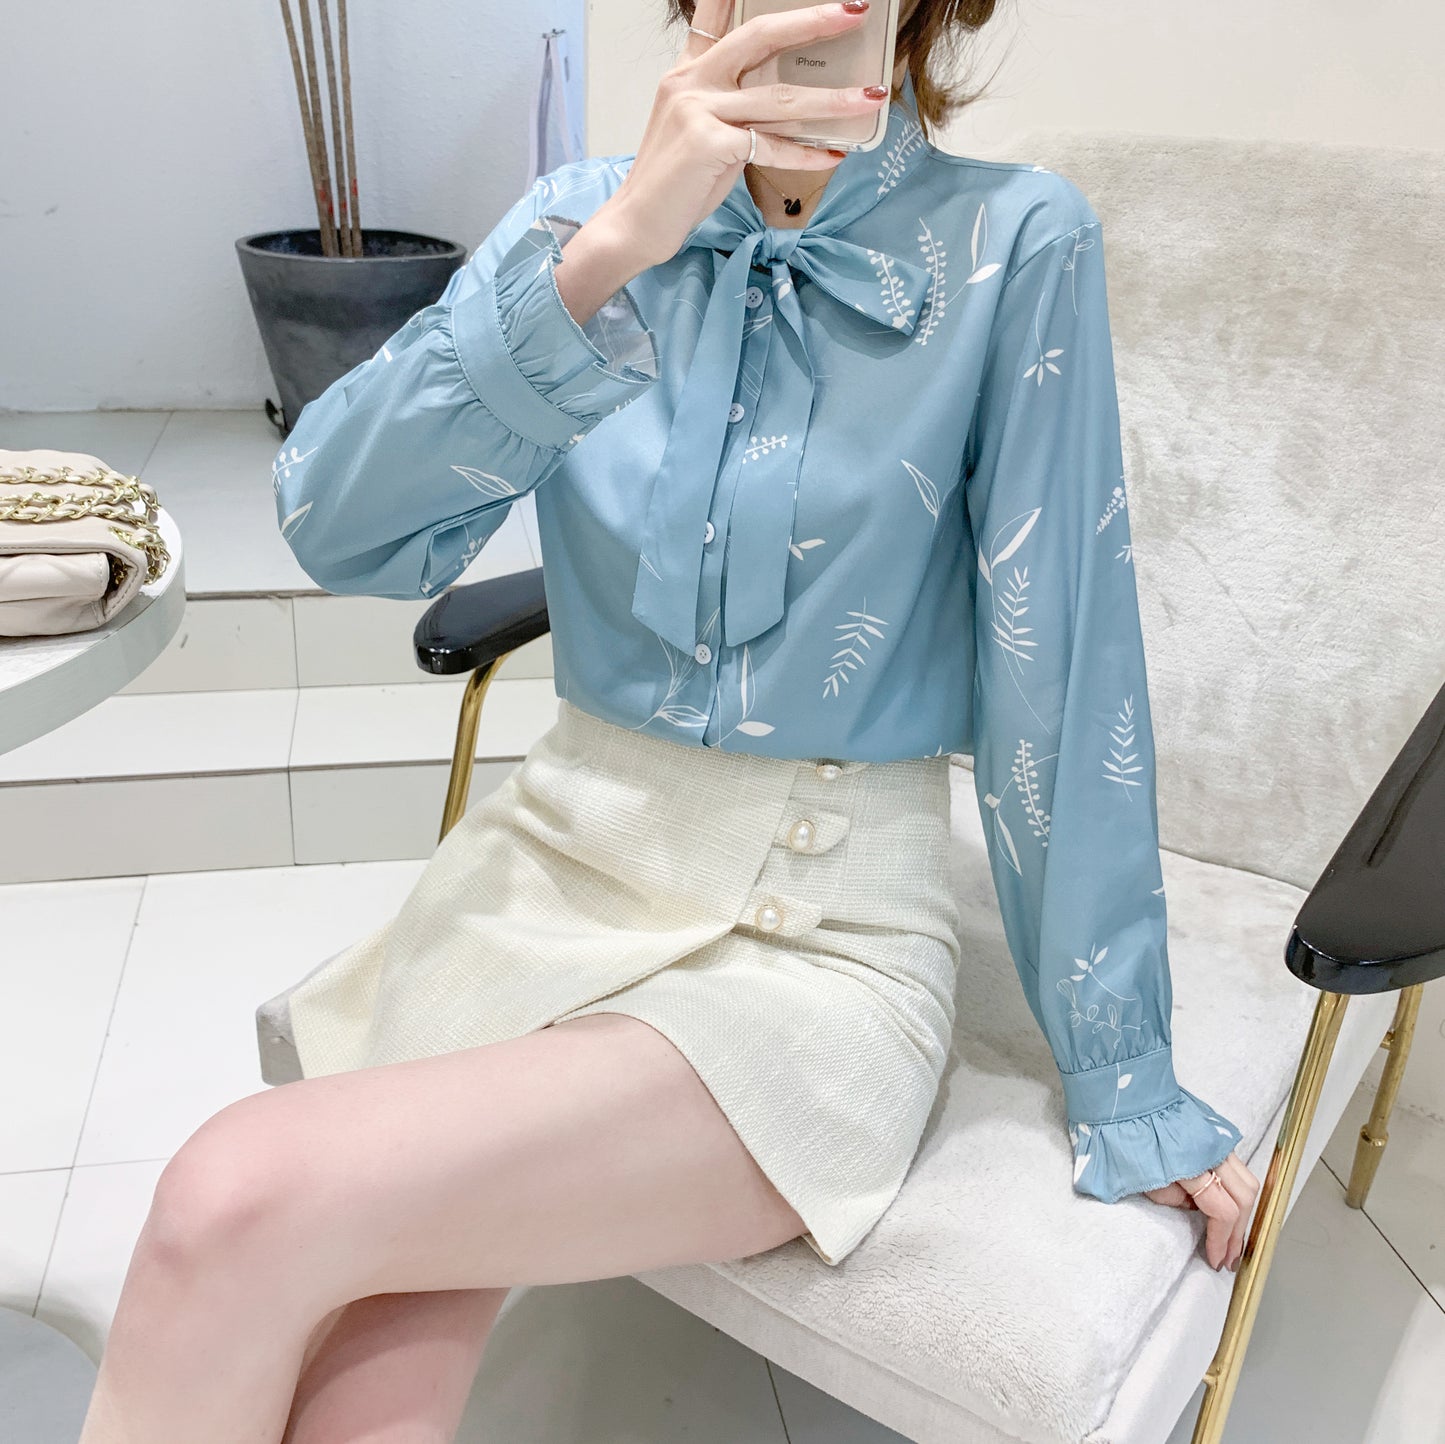 Pattern Bow Tie Long Sleeve Button up Shirt Blouse